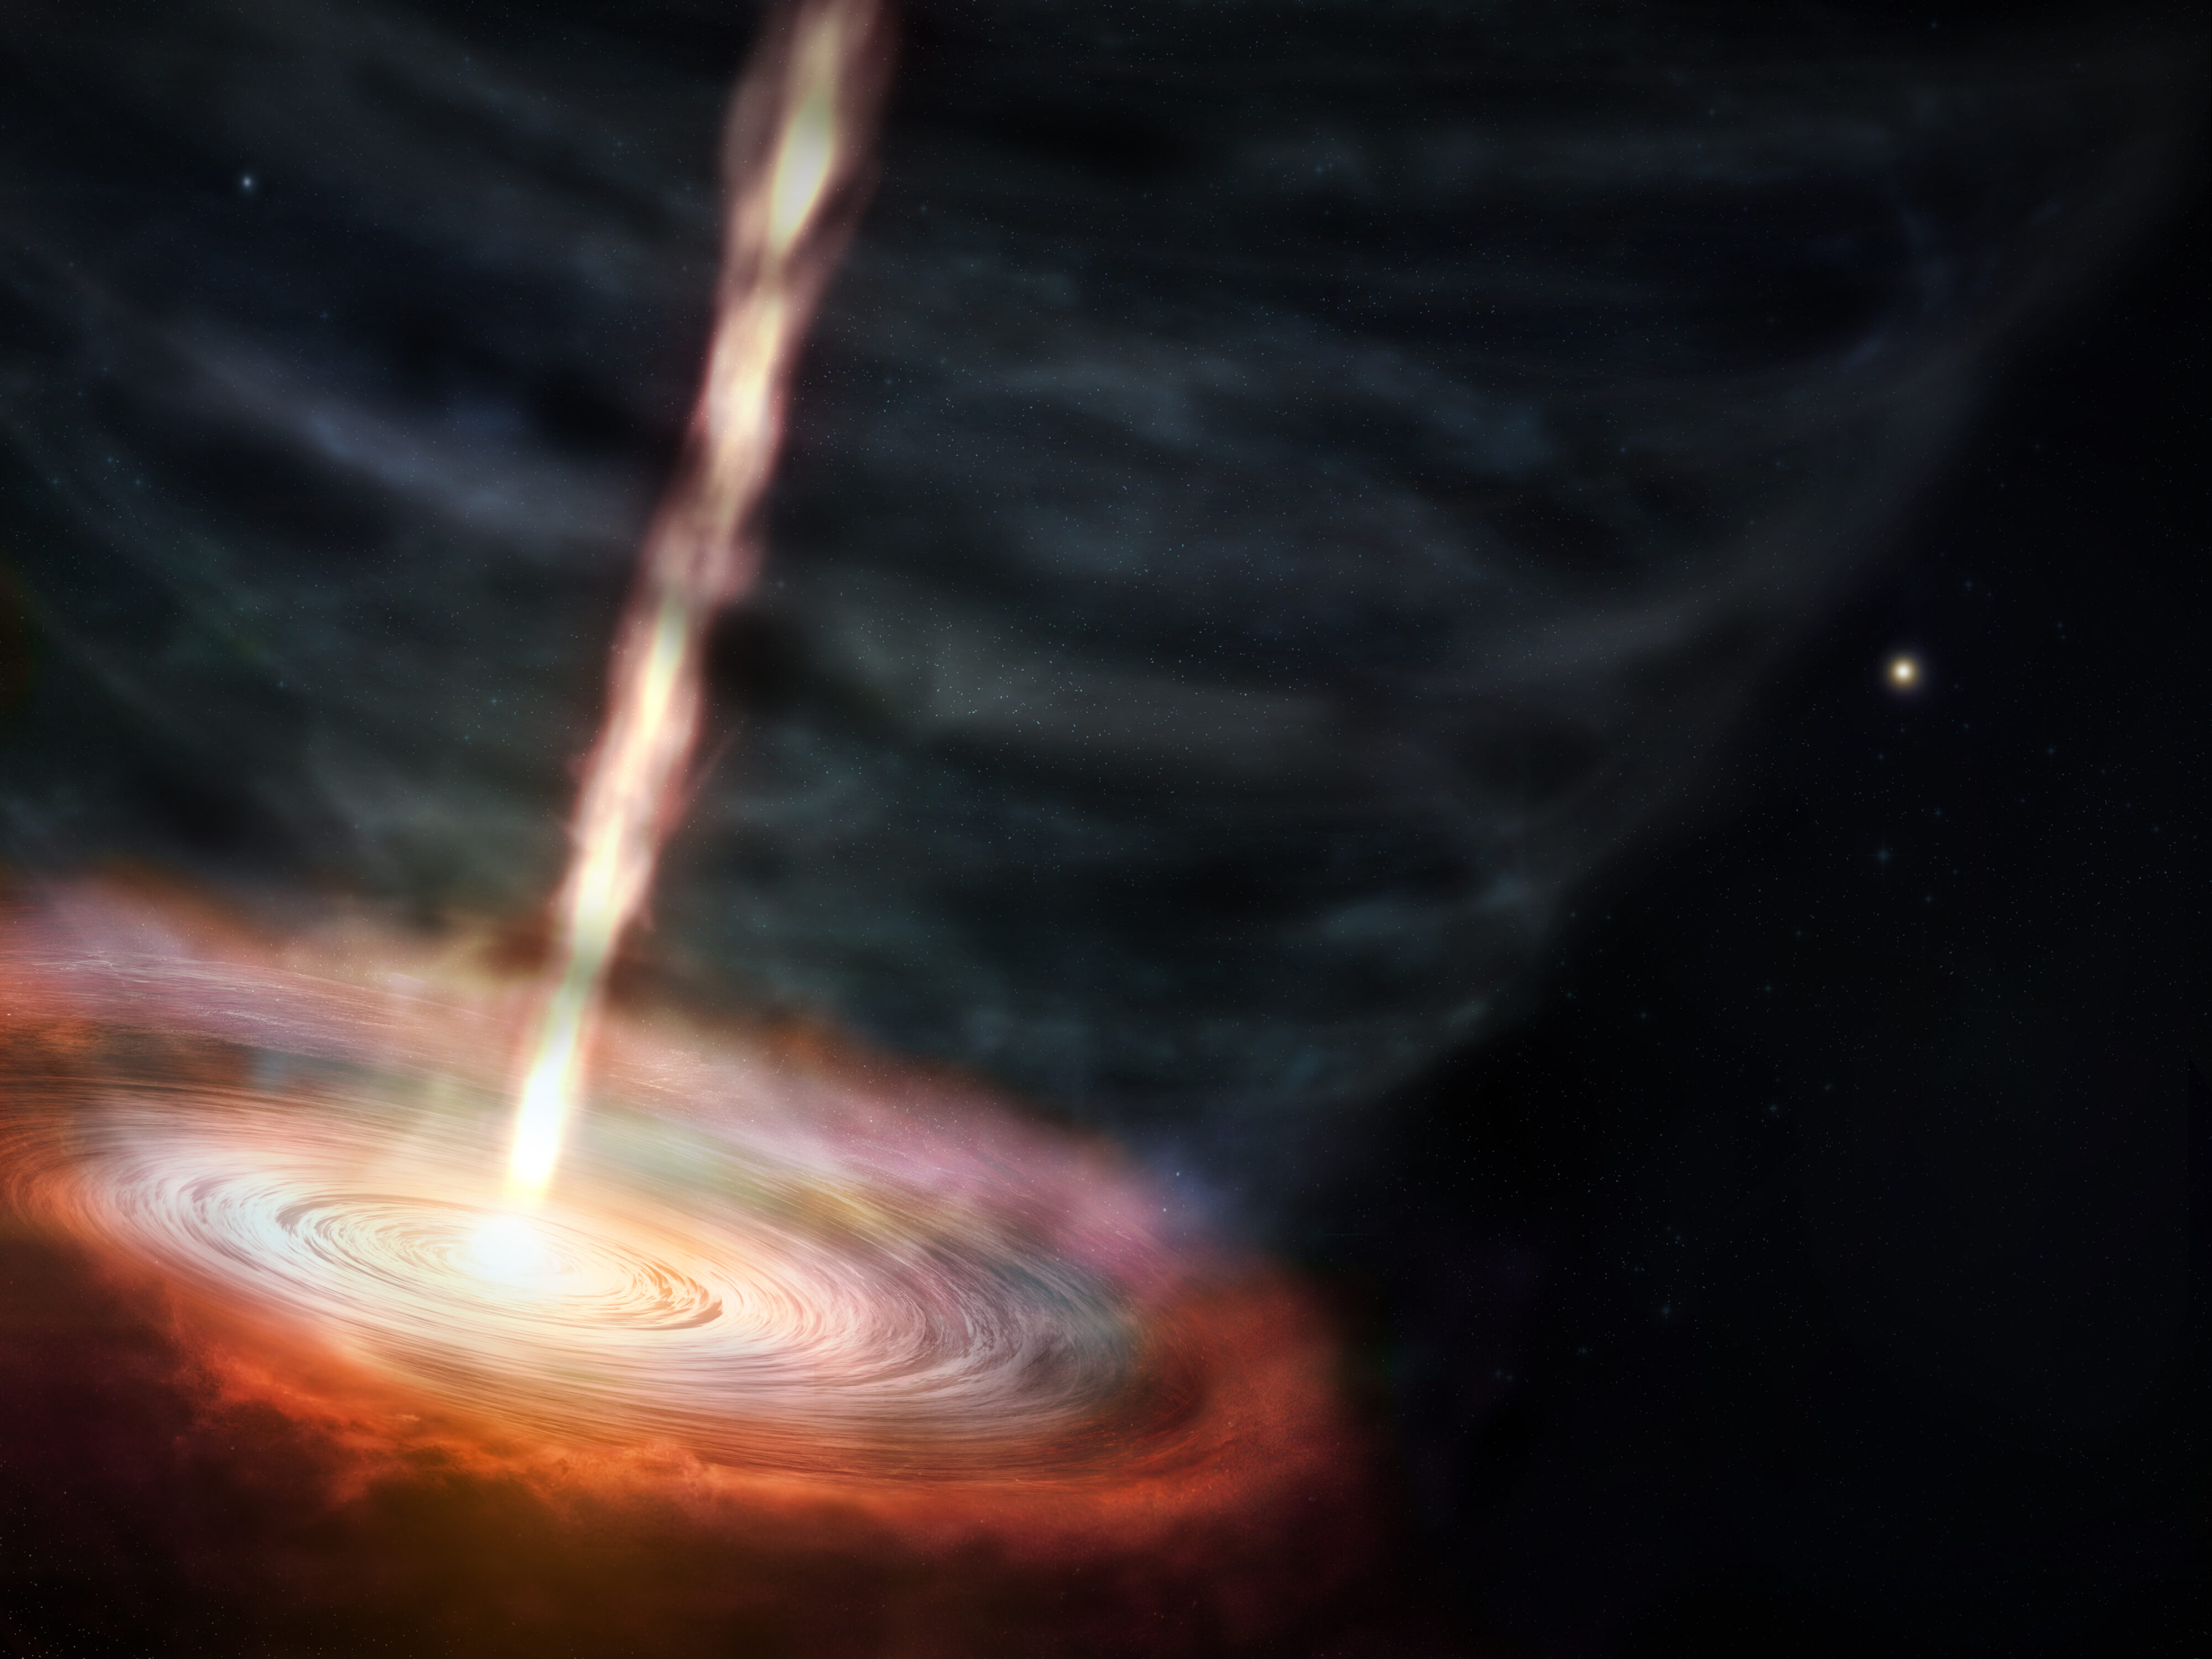 Scientists studying masers— naturally occurring lasers that amplify microwave radio emissions— around the massive star MWC 349A discovered a 500 km/s jet of material launching out of the star’s gas disk from within the winds that are flowing away from the star. The bigger surprise is that the jet may be caused by magnetic forces. This artist’s conception shows a zoomed in view of MWC 349A and its surrounding disk of gas and dust that are being shaped by the winds and high-speed jet. Credit: ALMA (ESO/NAOJ/NRAO), M. Weiss (NRAO/AUI/NSF)